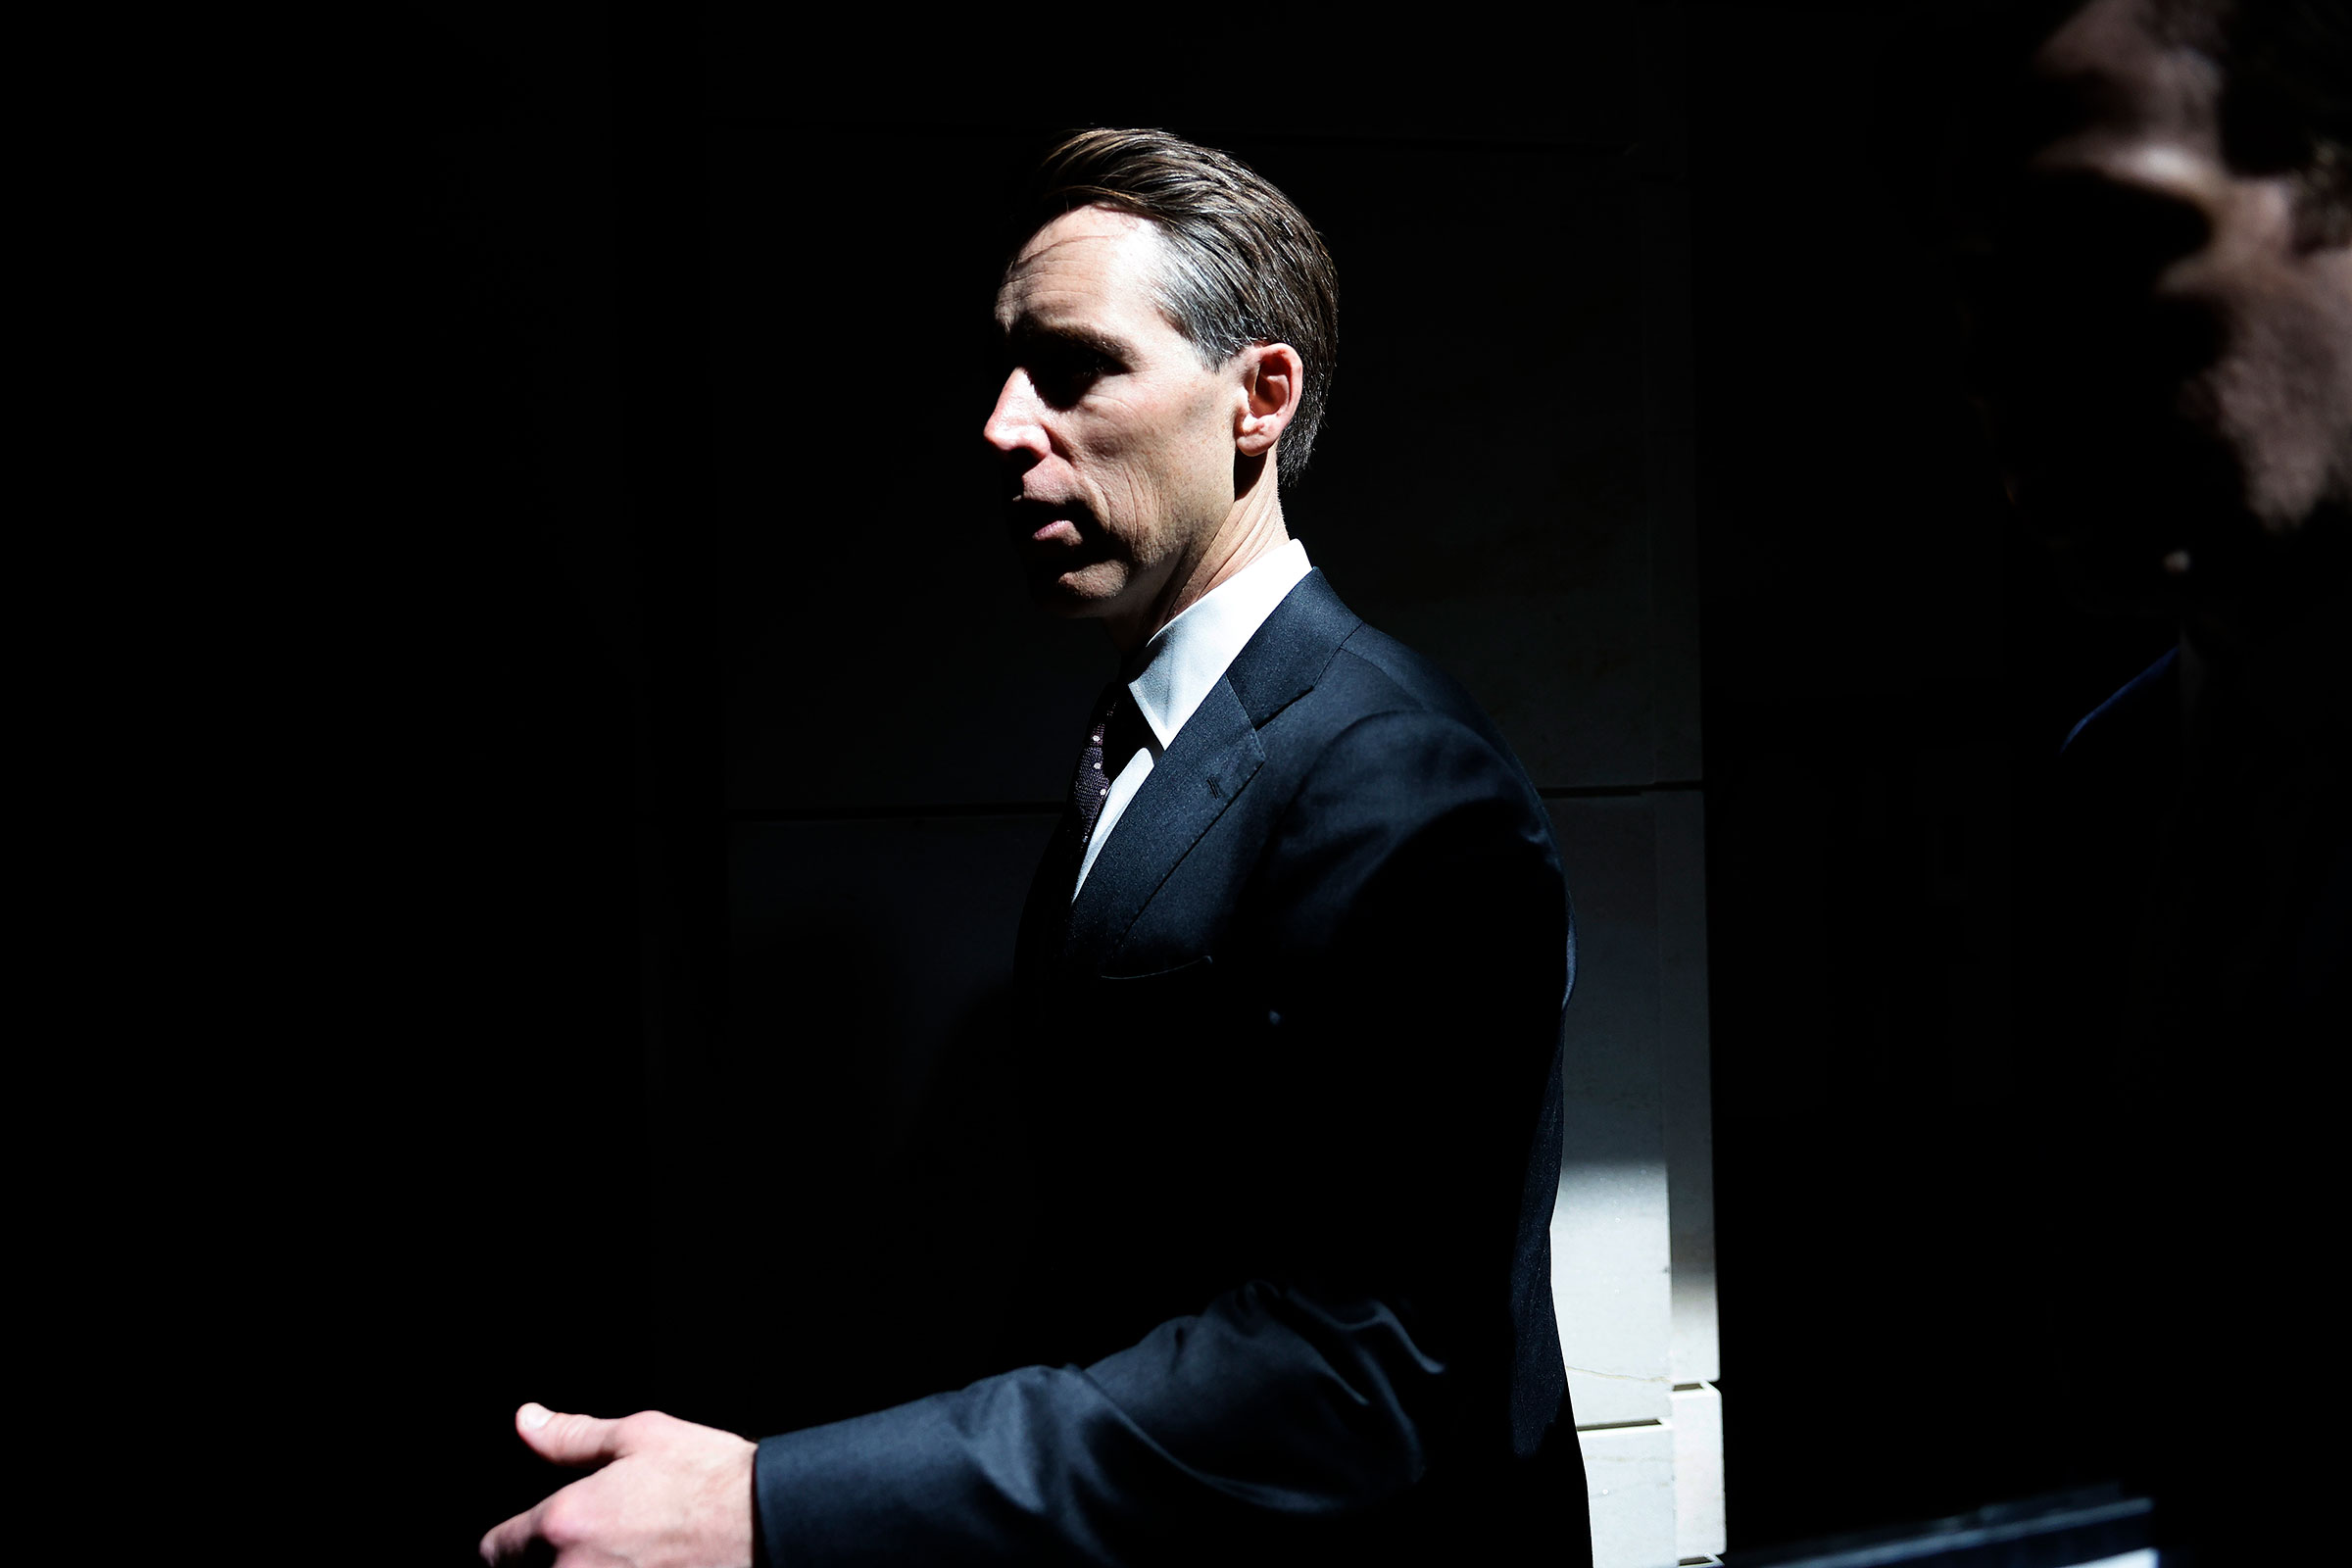 Sen. Josh Hawley arrives for a closed-door briefing by intelligence officials about the Discord leaks at the U.S. Capitol Visitors Center on April 19, 2023 in Washington, DC.